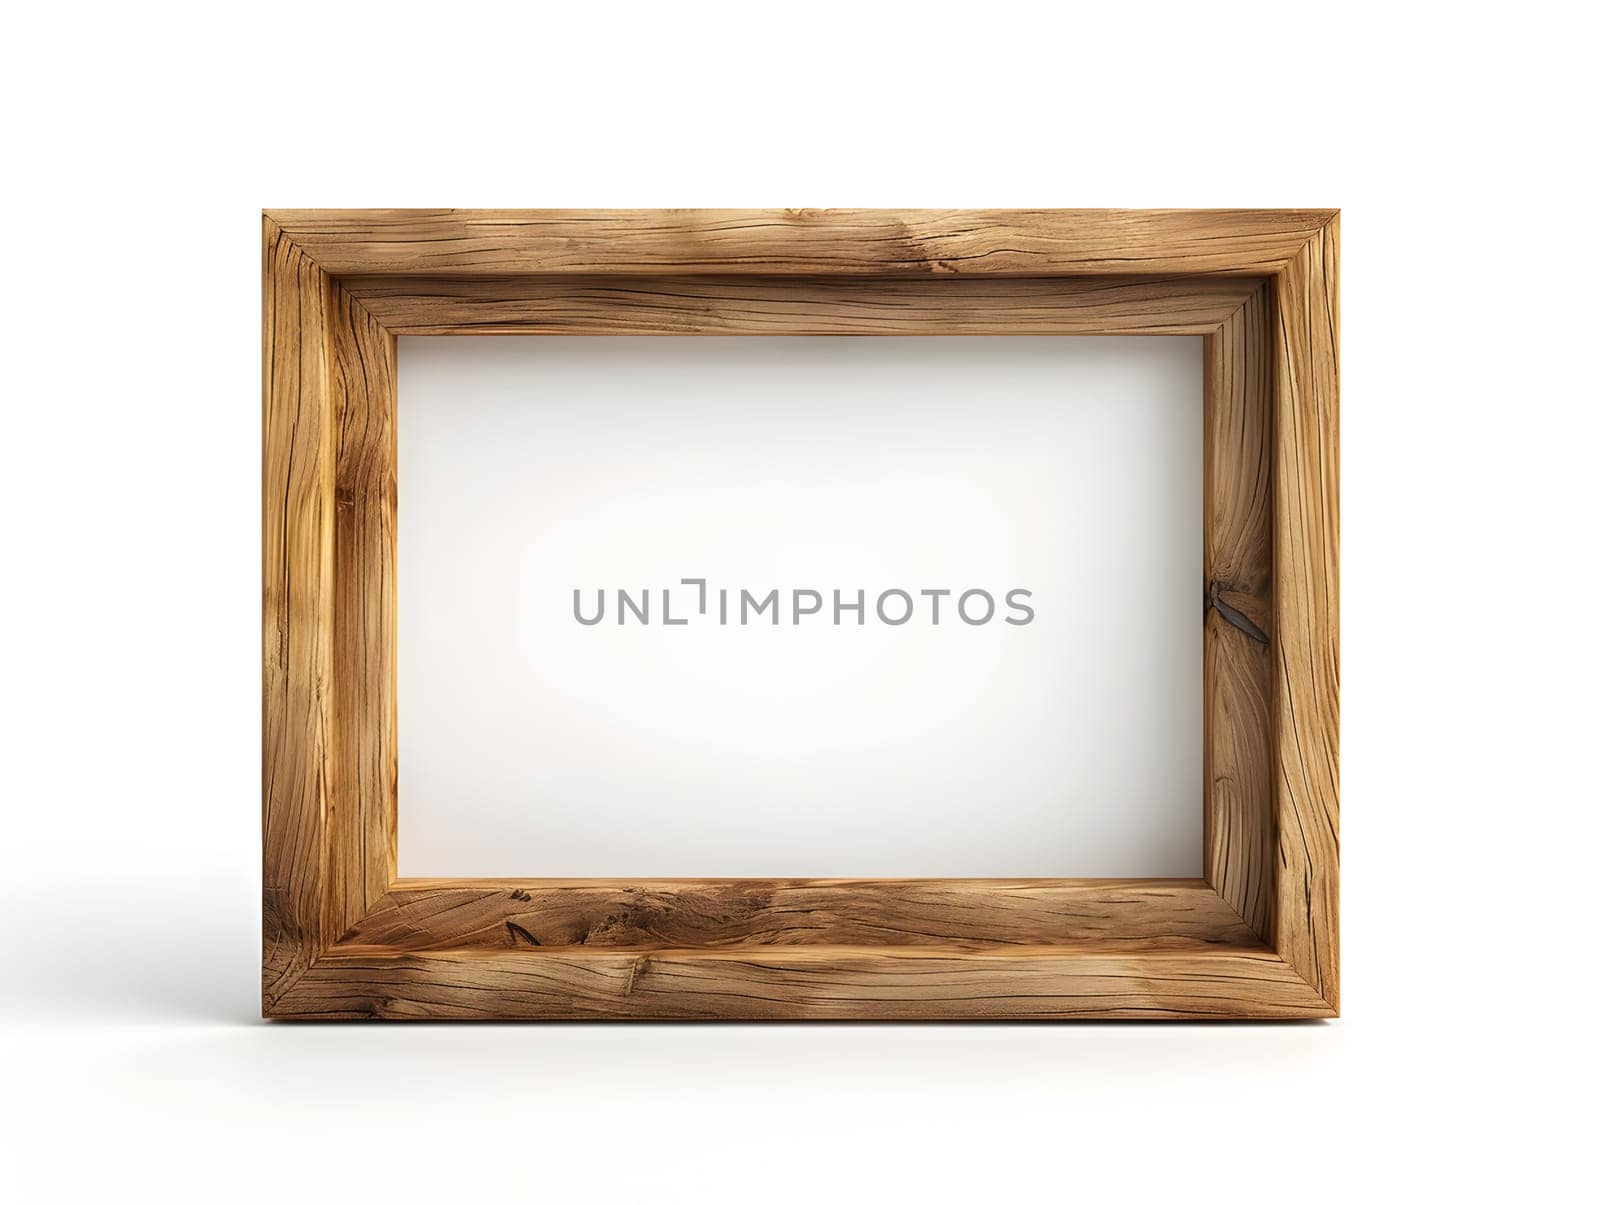 A rectangular brown wooden picture frame on a white background, crafted from hardwood. Perfect for displaying art or photos